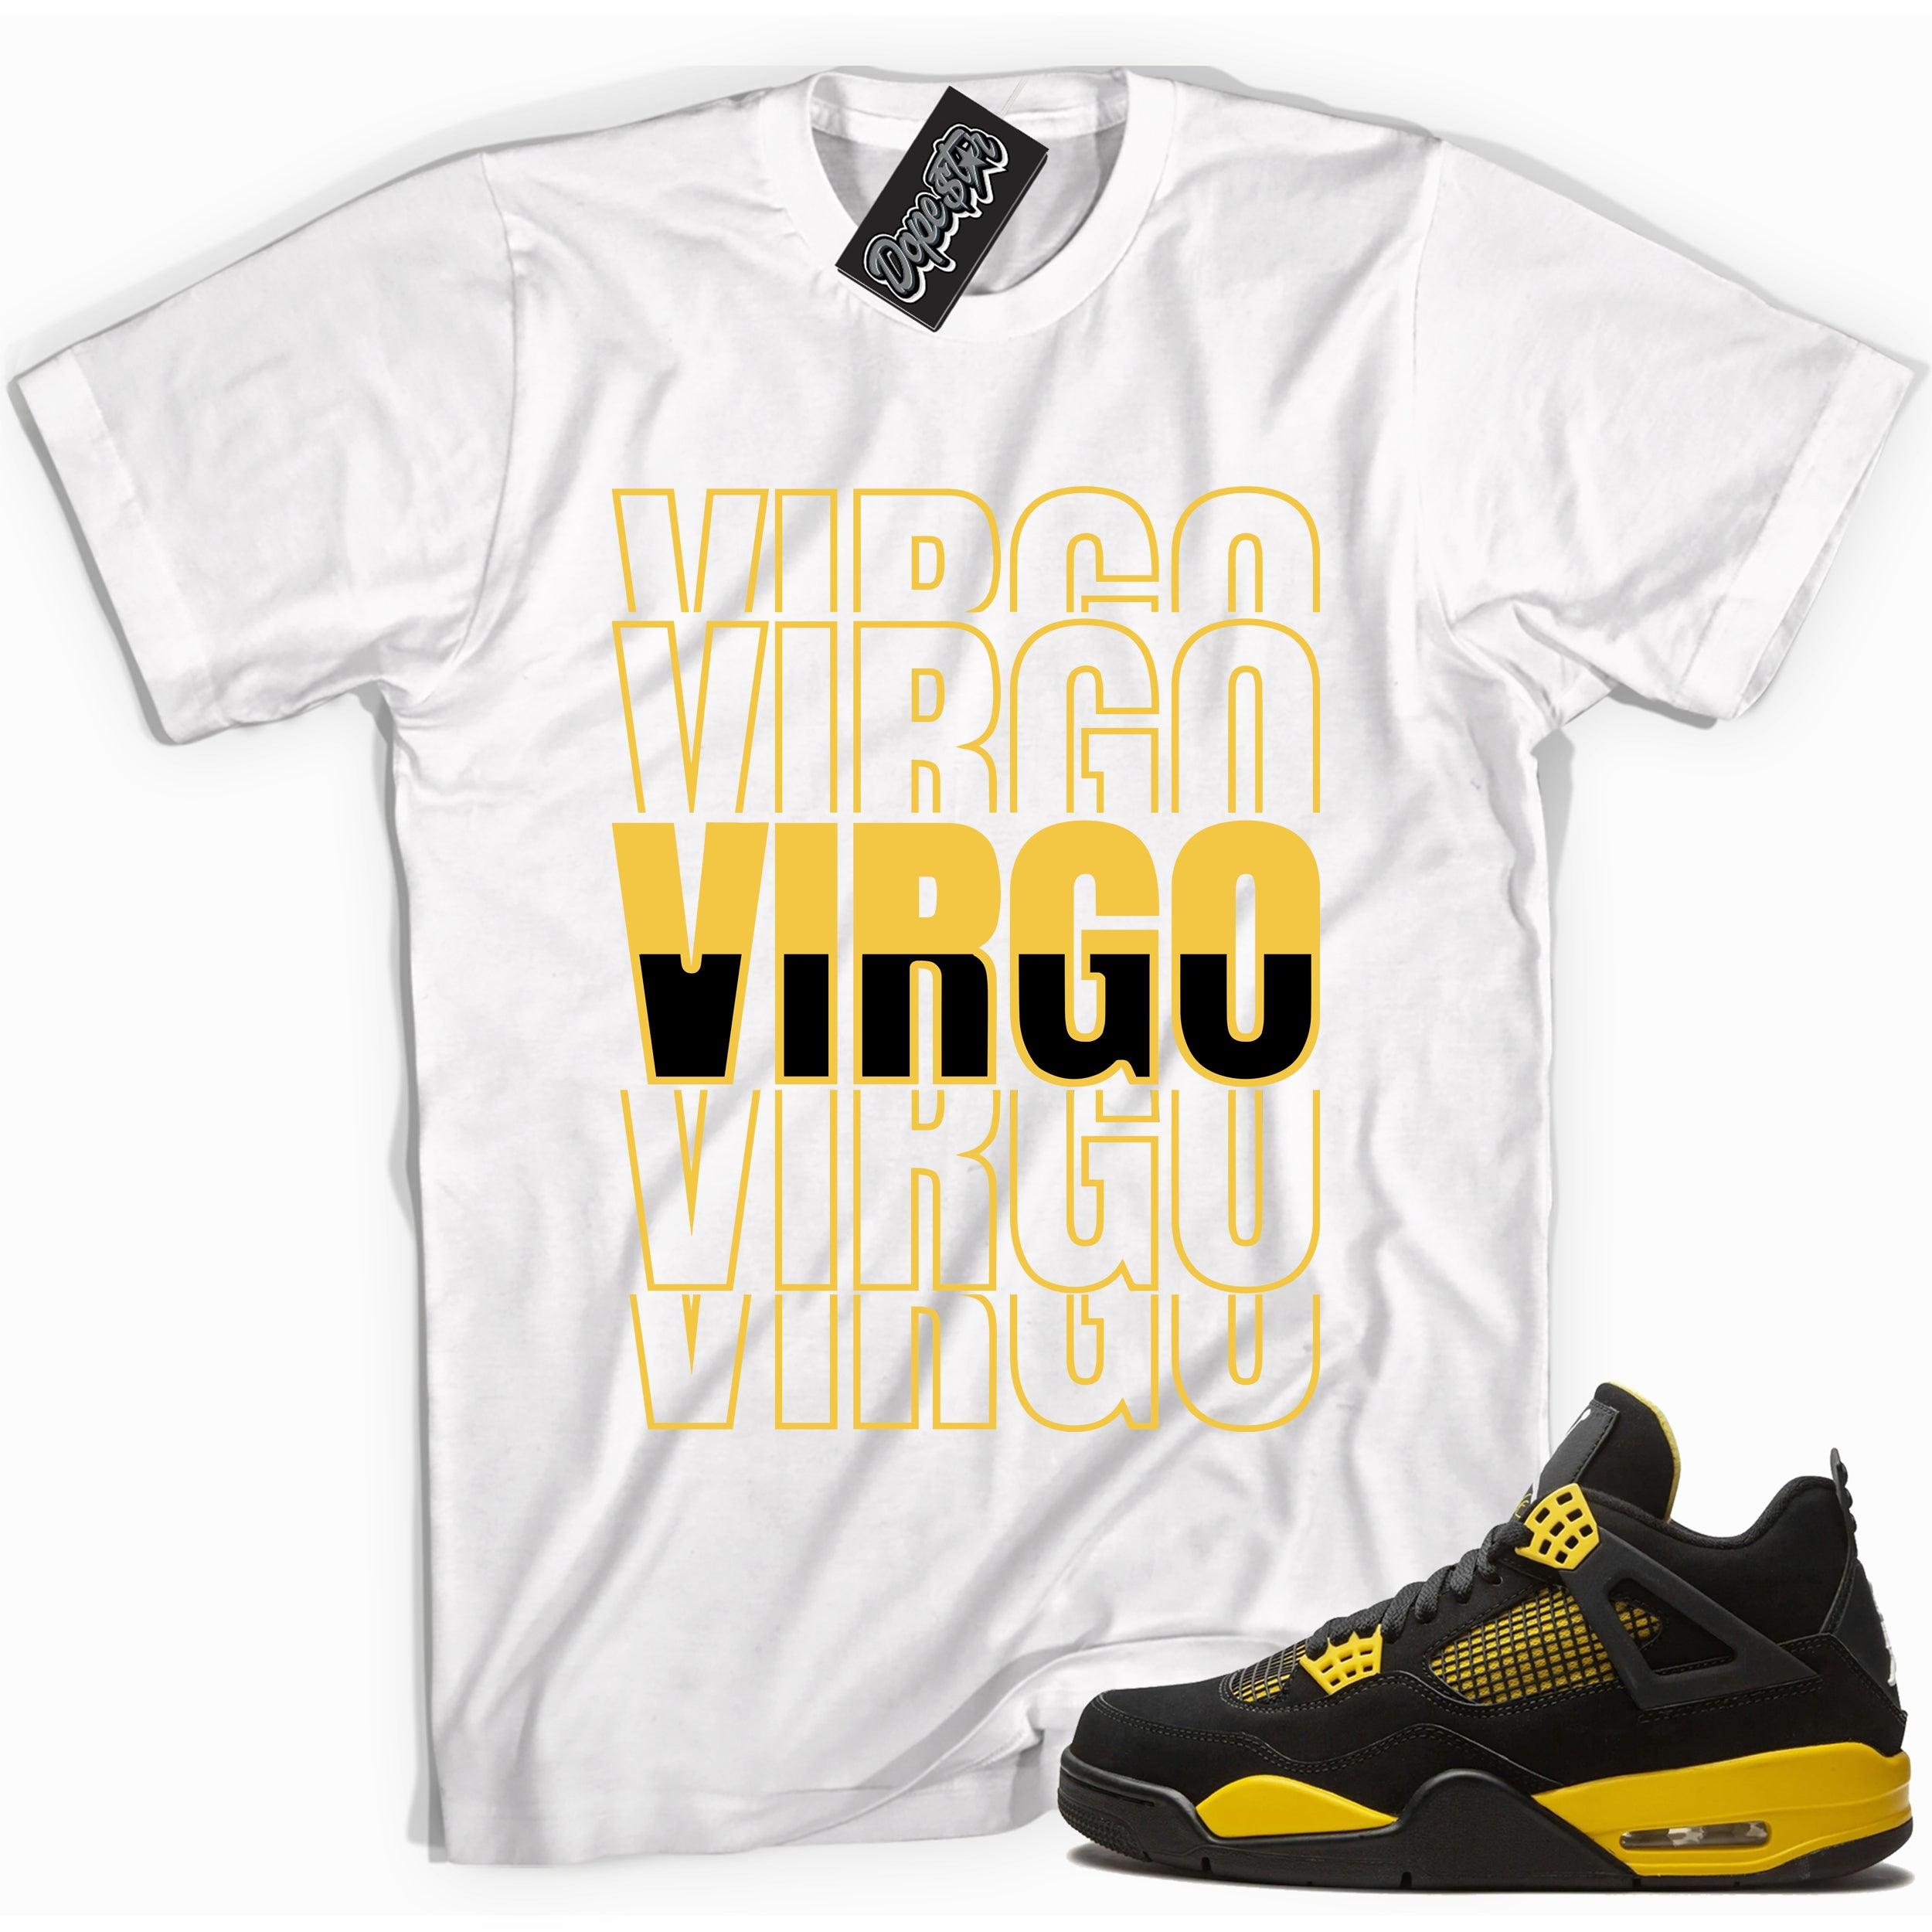 Cool white graphic tee with 'virgo' print, that perfectly matches Air Jordan 4 Thunder sneakers